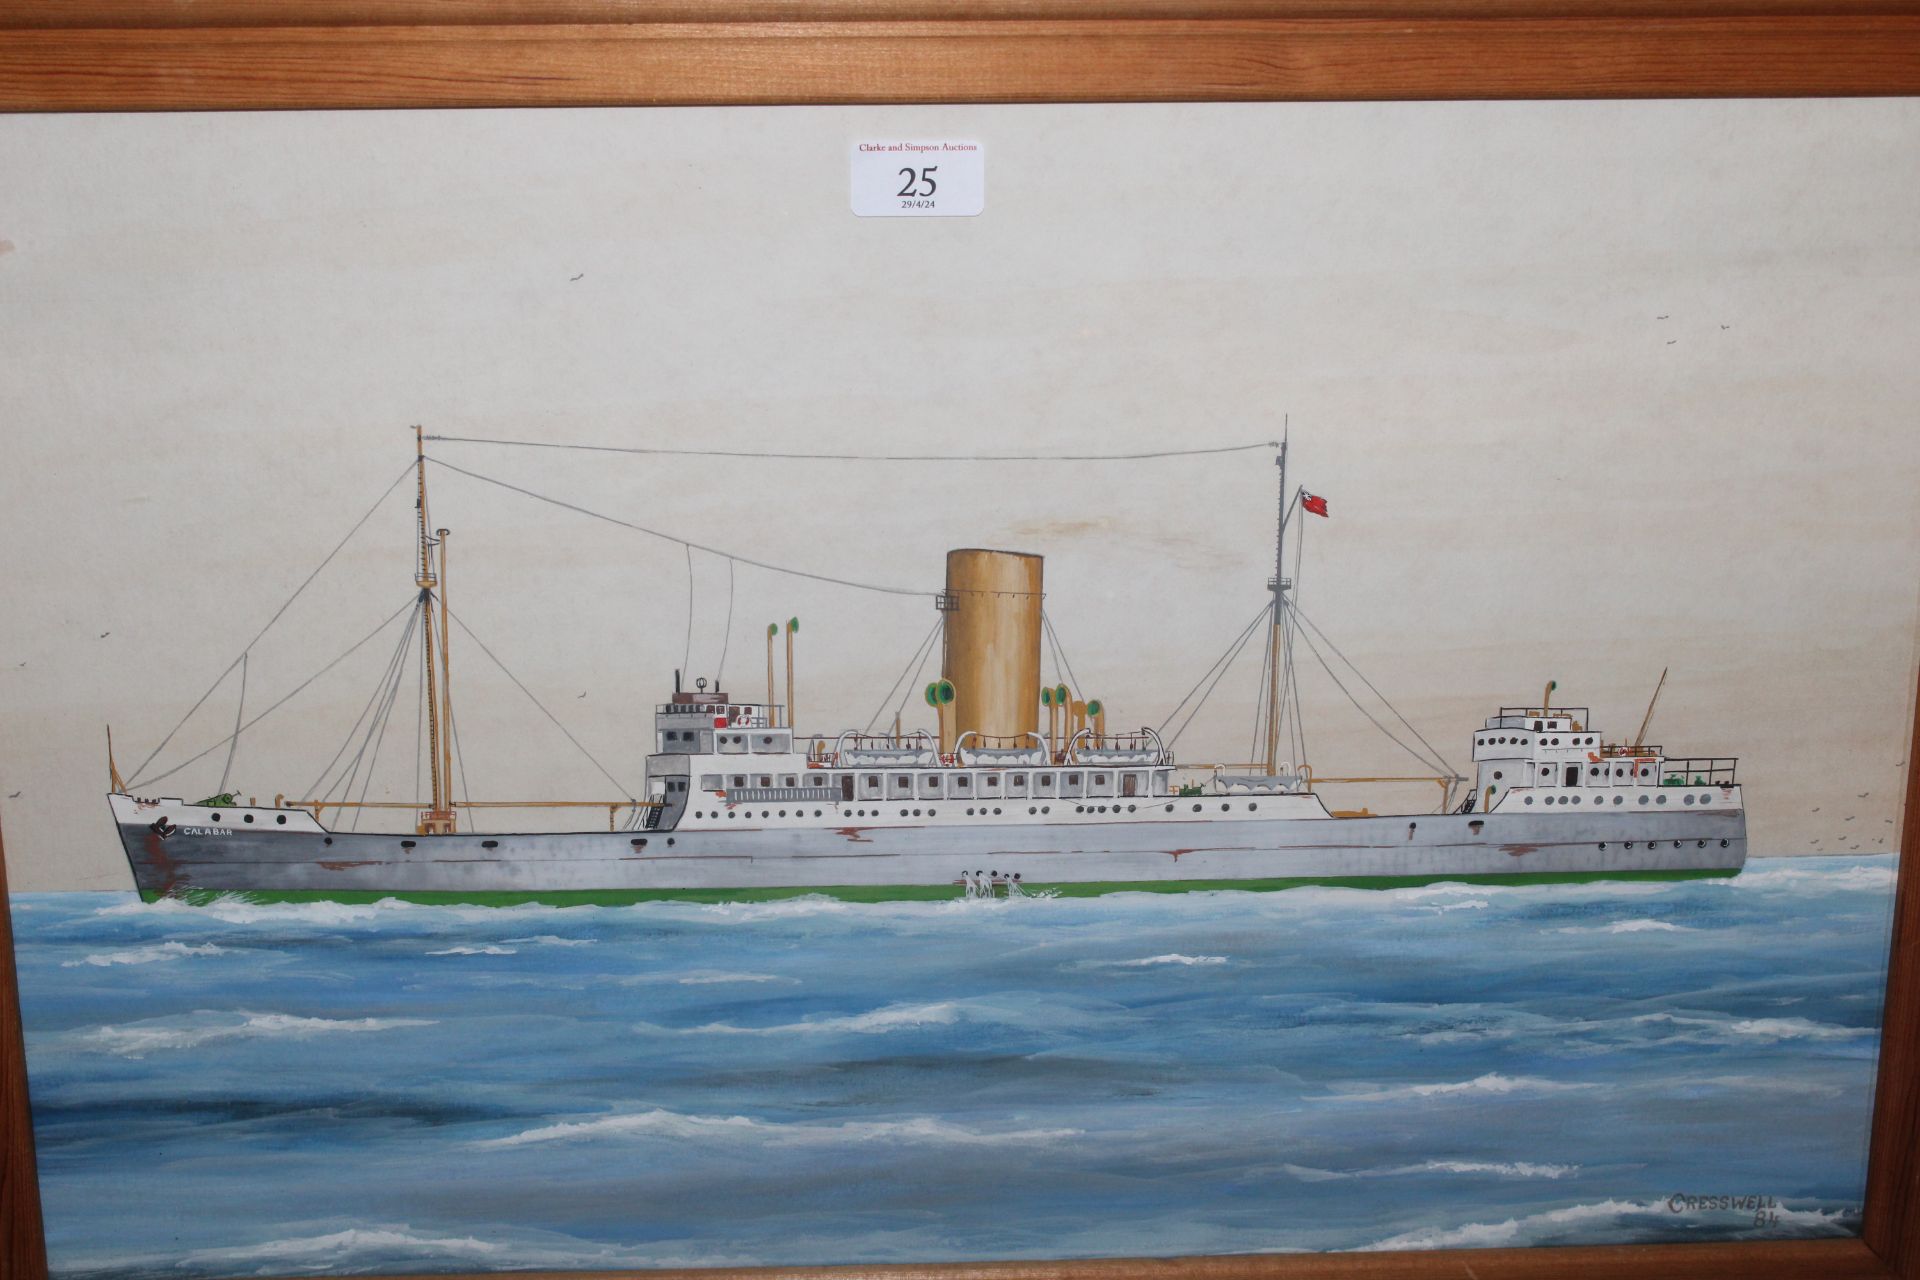 Cresswell, gouache study of the steam ship "Calaba - Image 2 of 3